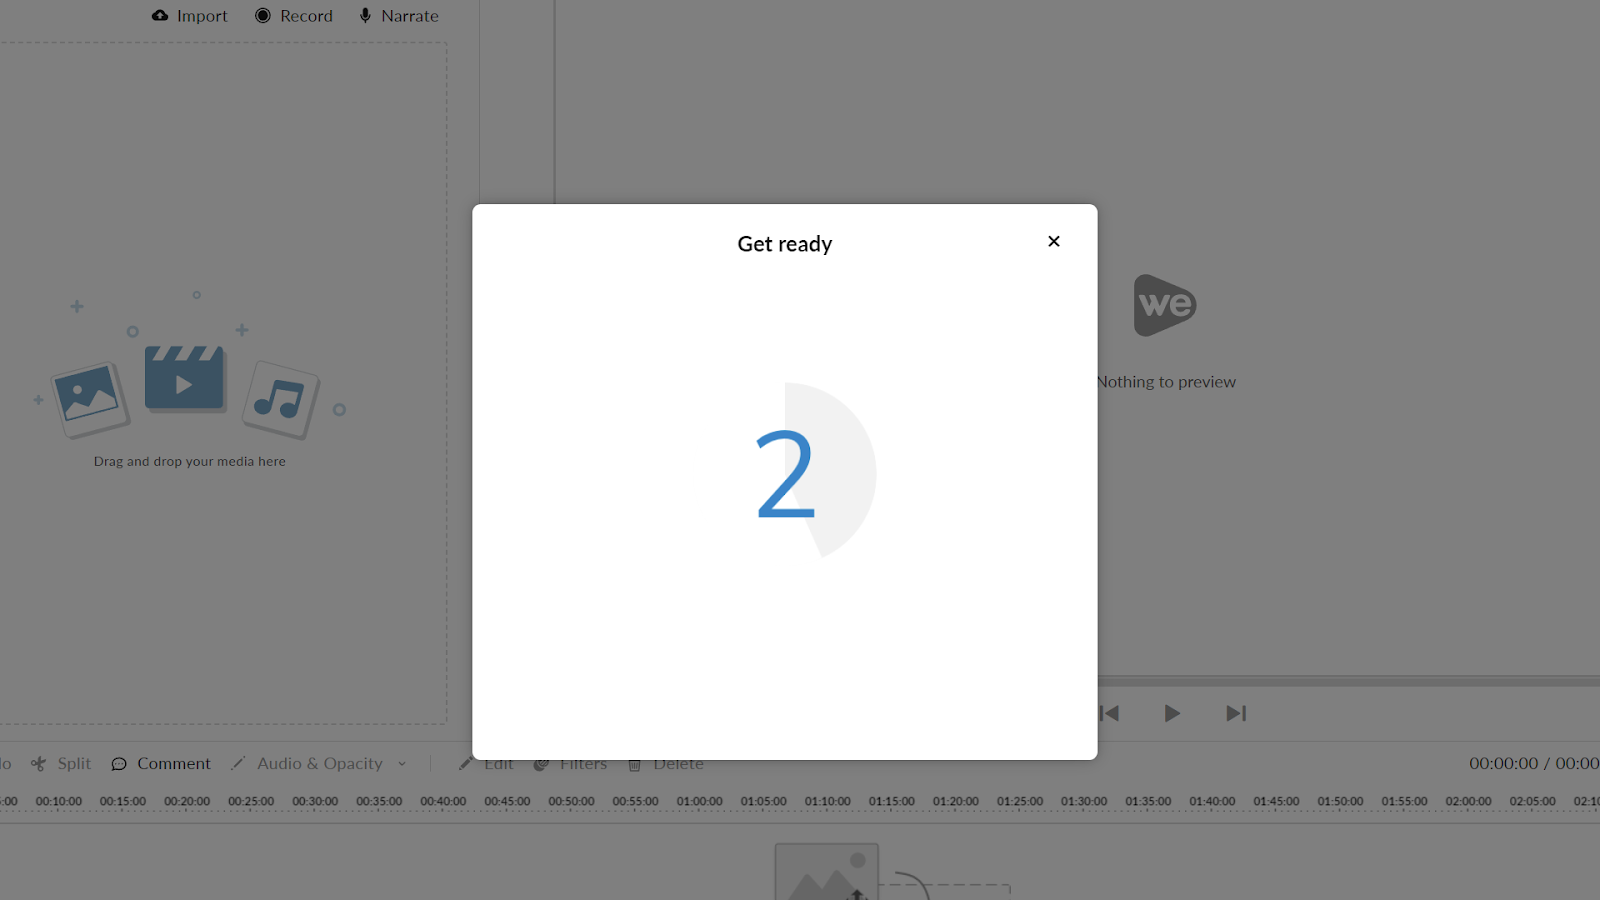 Countdown timer of WeVideo's screen recording tools.